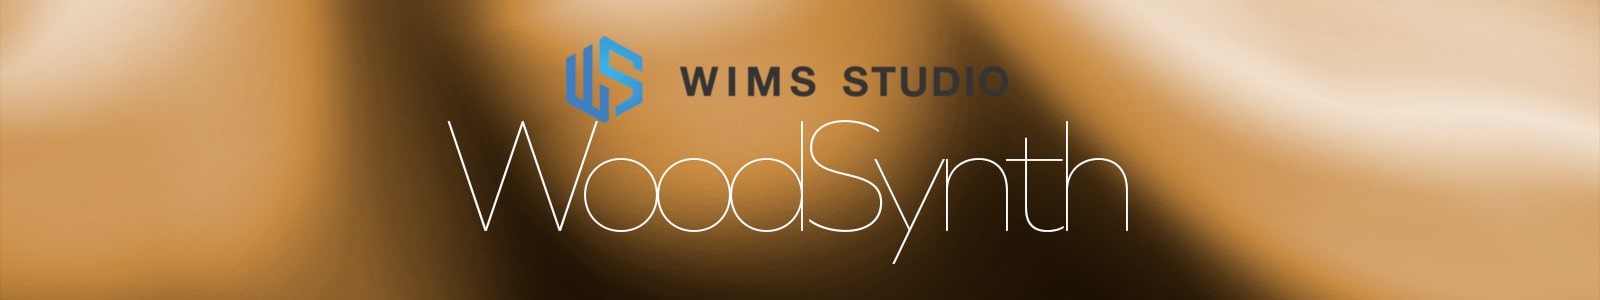 WoodSynth 3.0 by Wims Studio